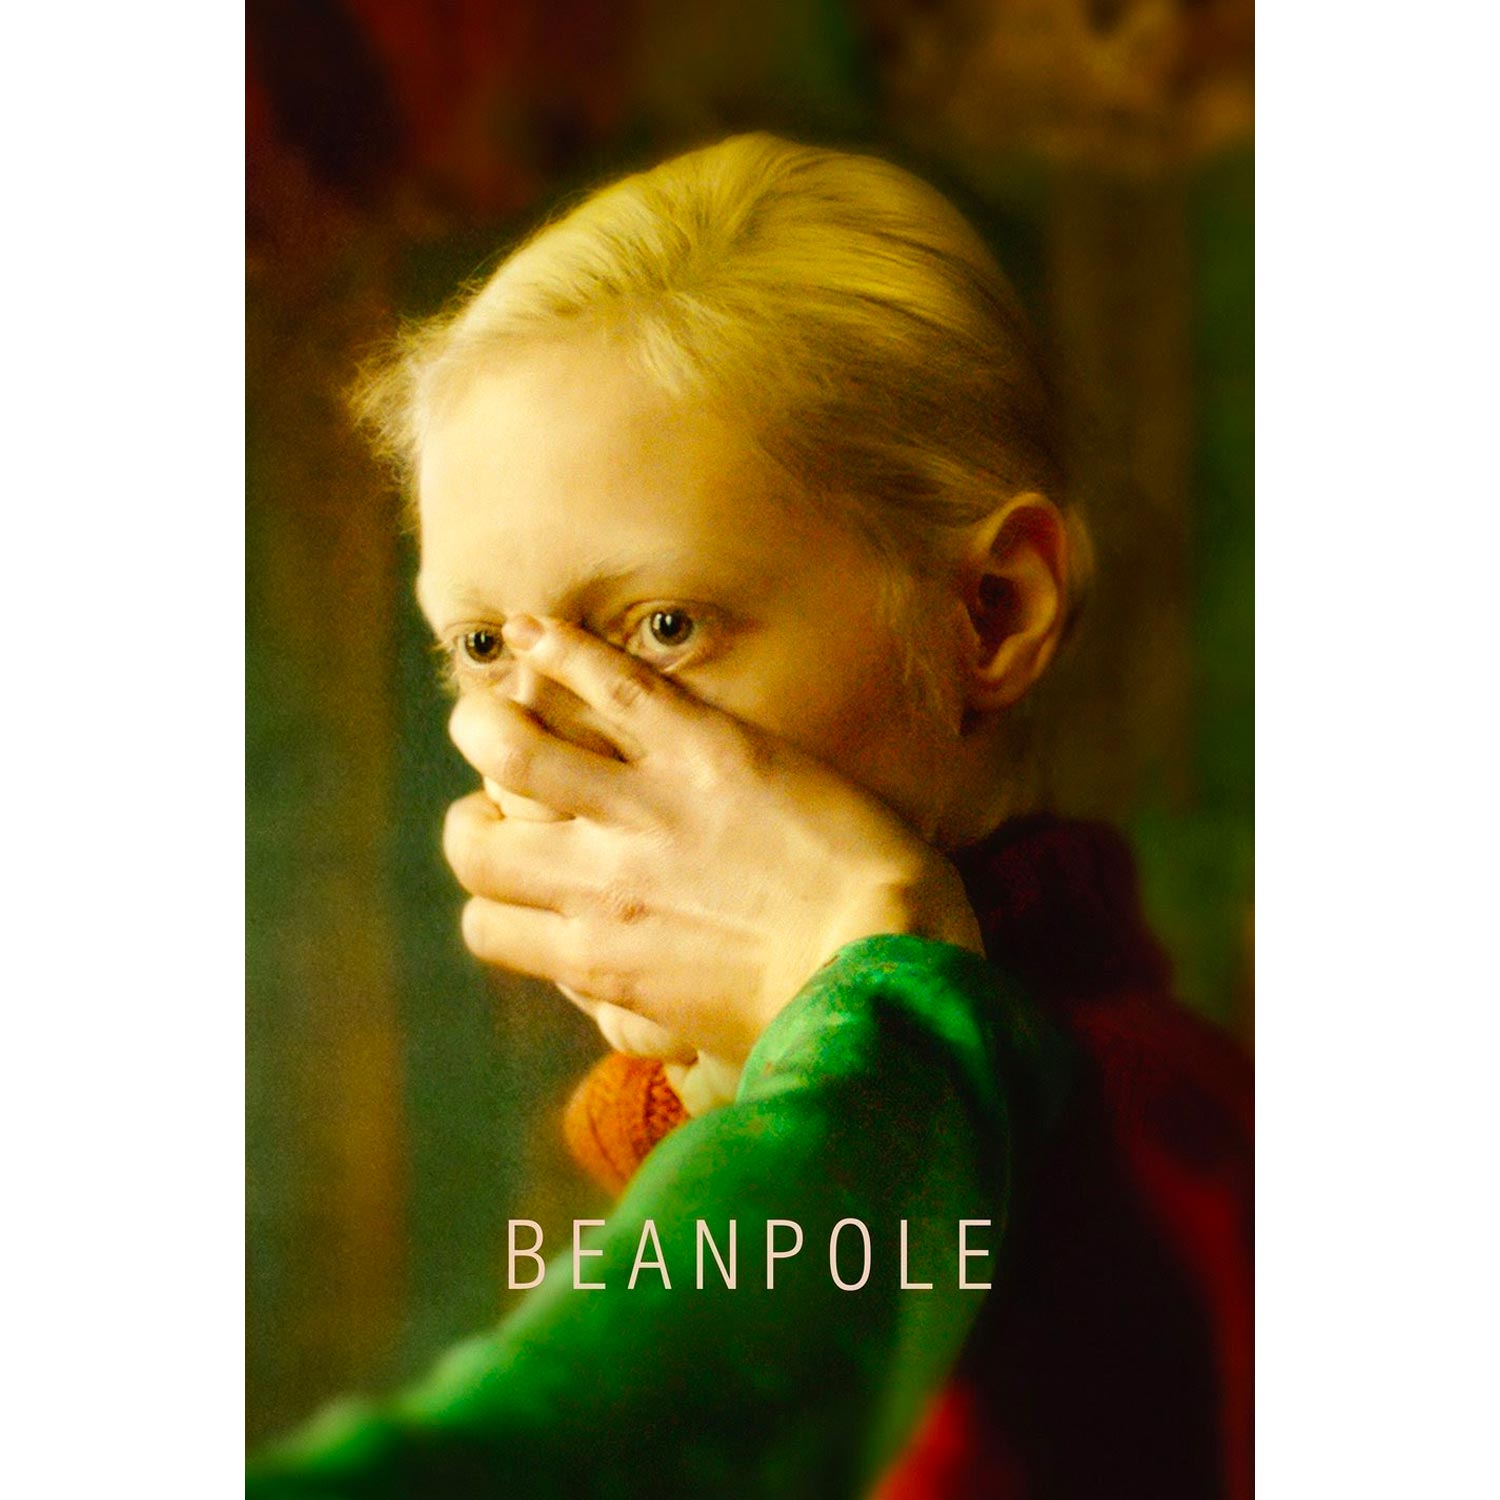 The poster for Beanpole.